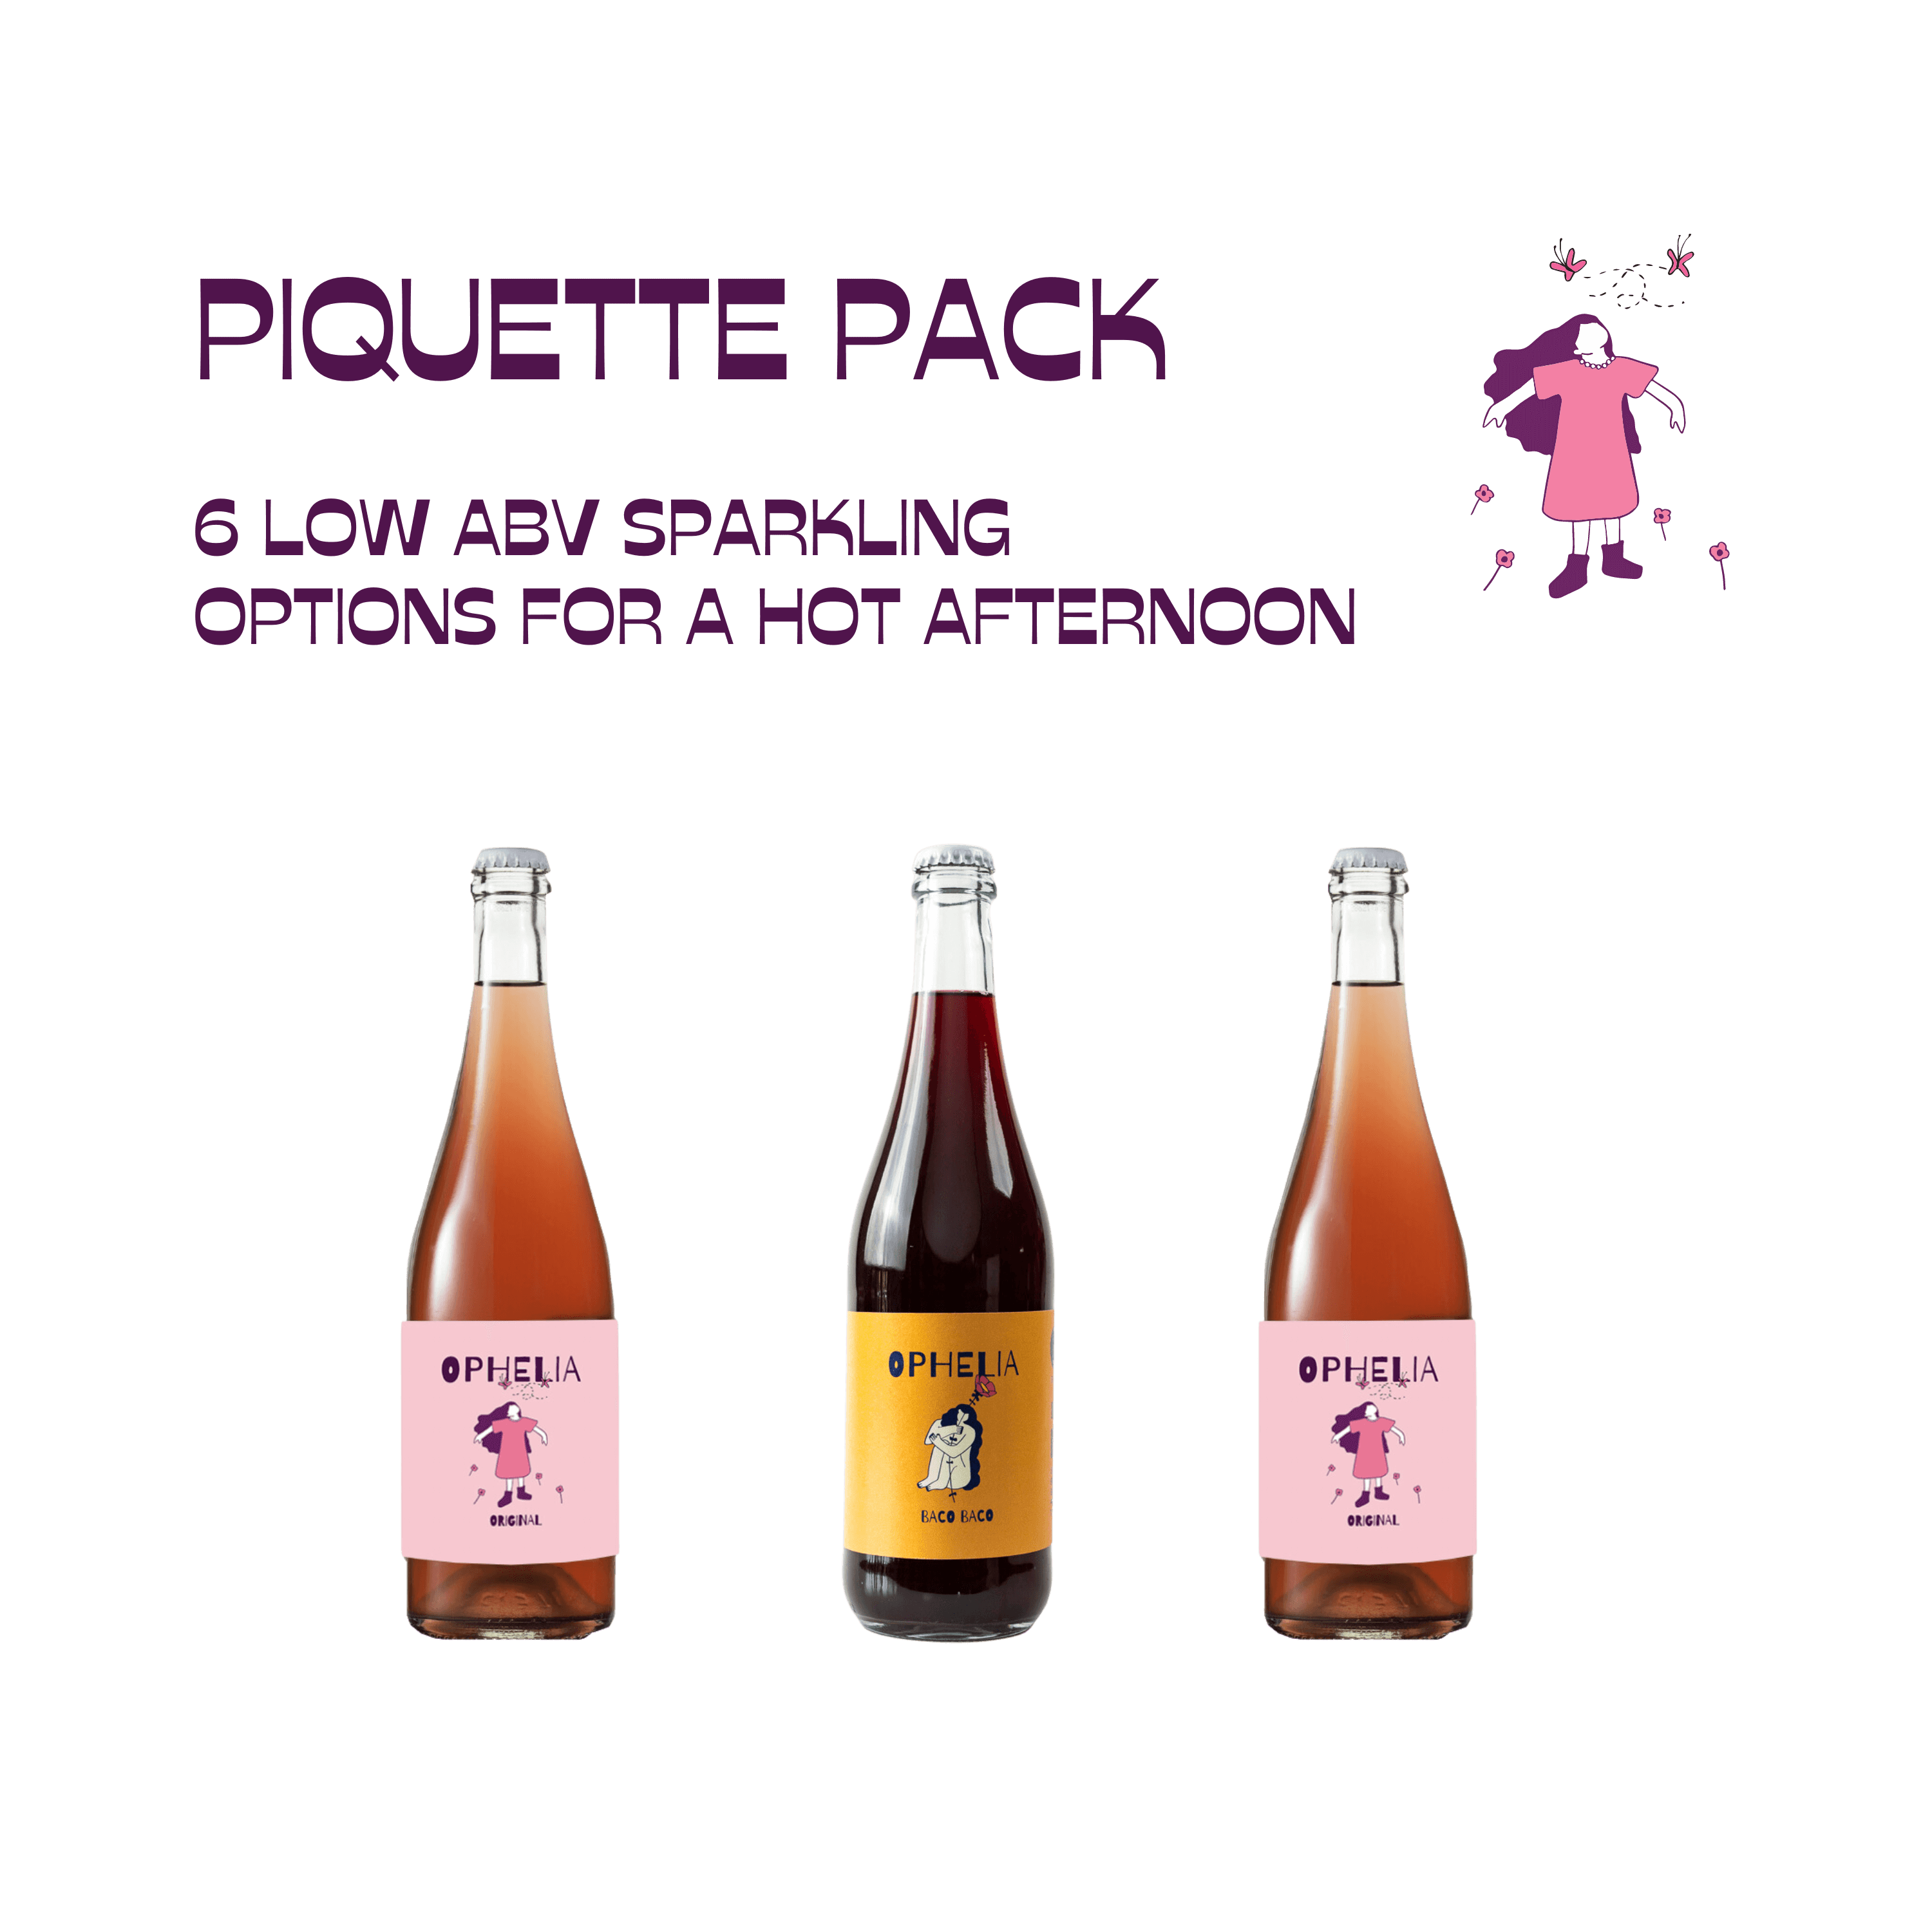 Ophelia Piquette Mixed Pack